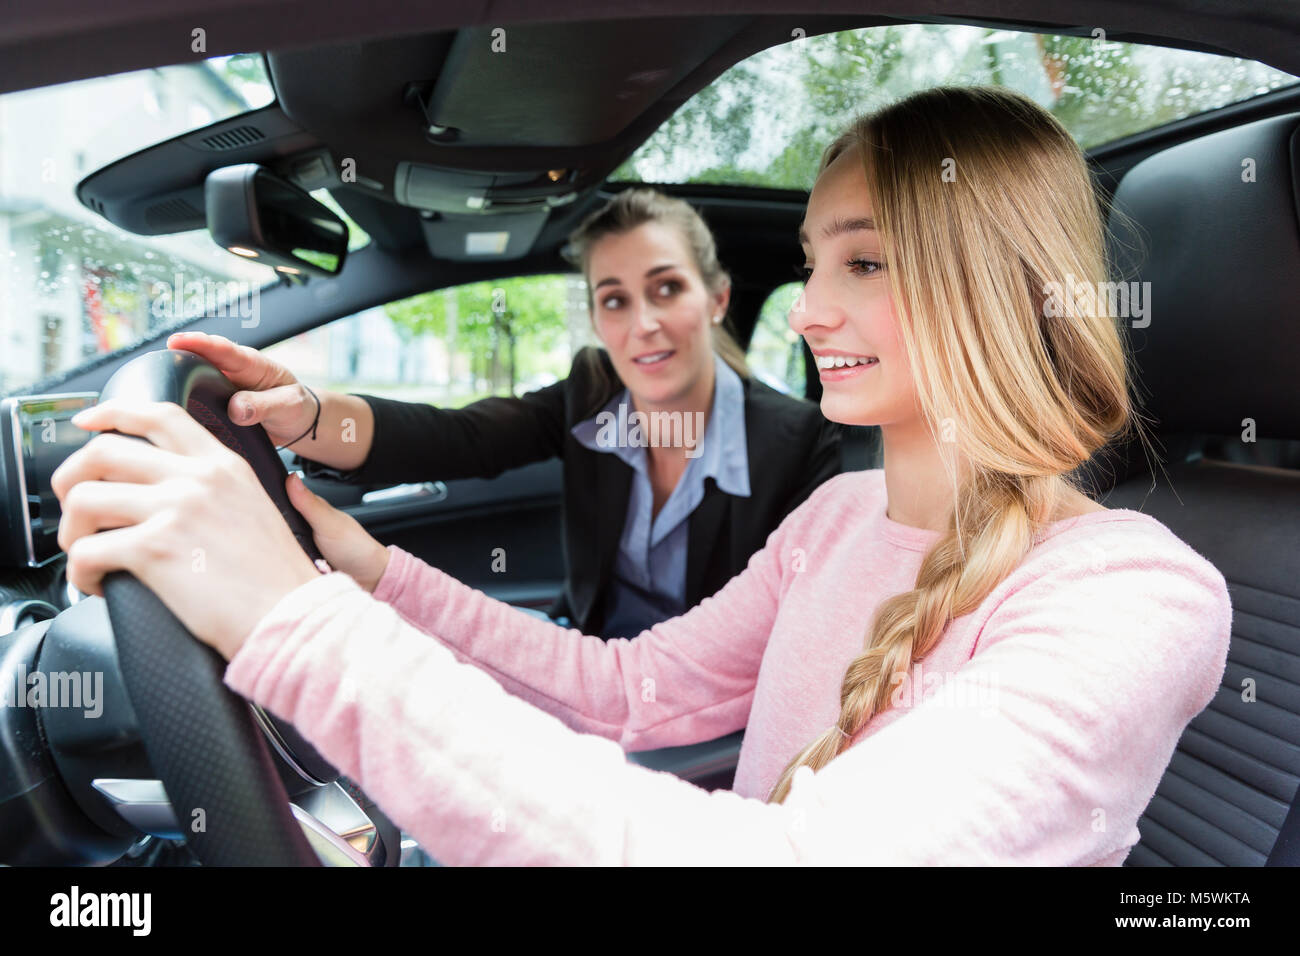 Student on wheel of car in driving lesson with her teacher Stock Photo